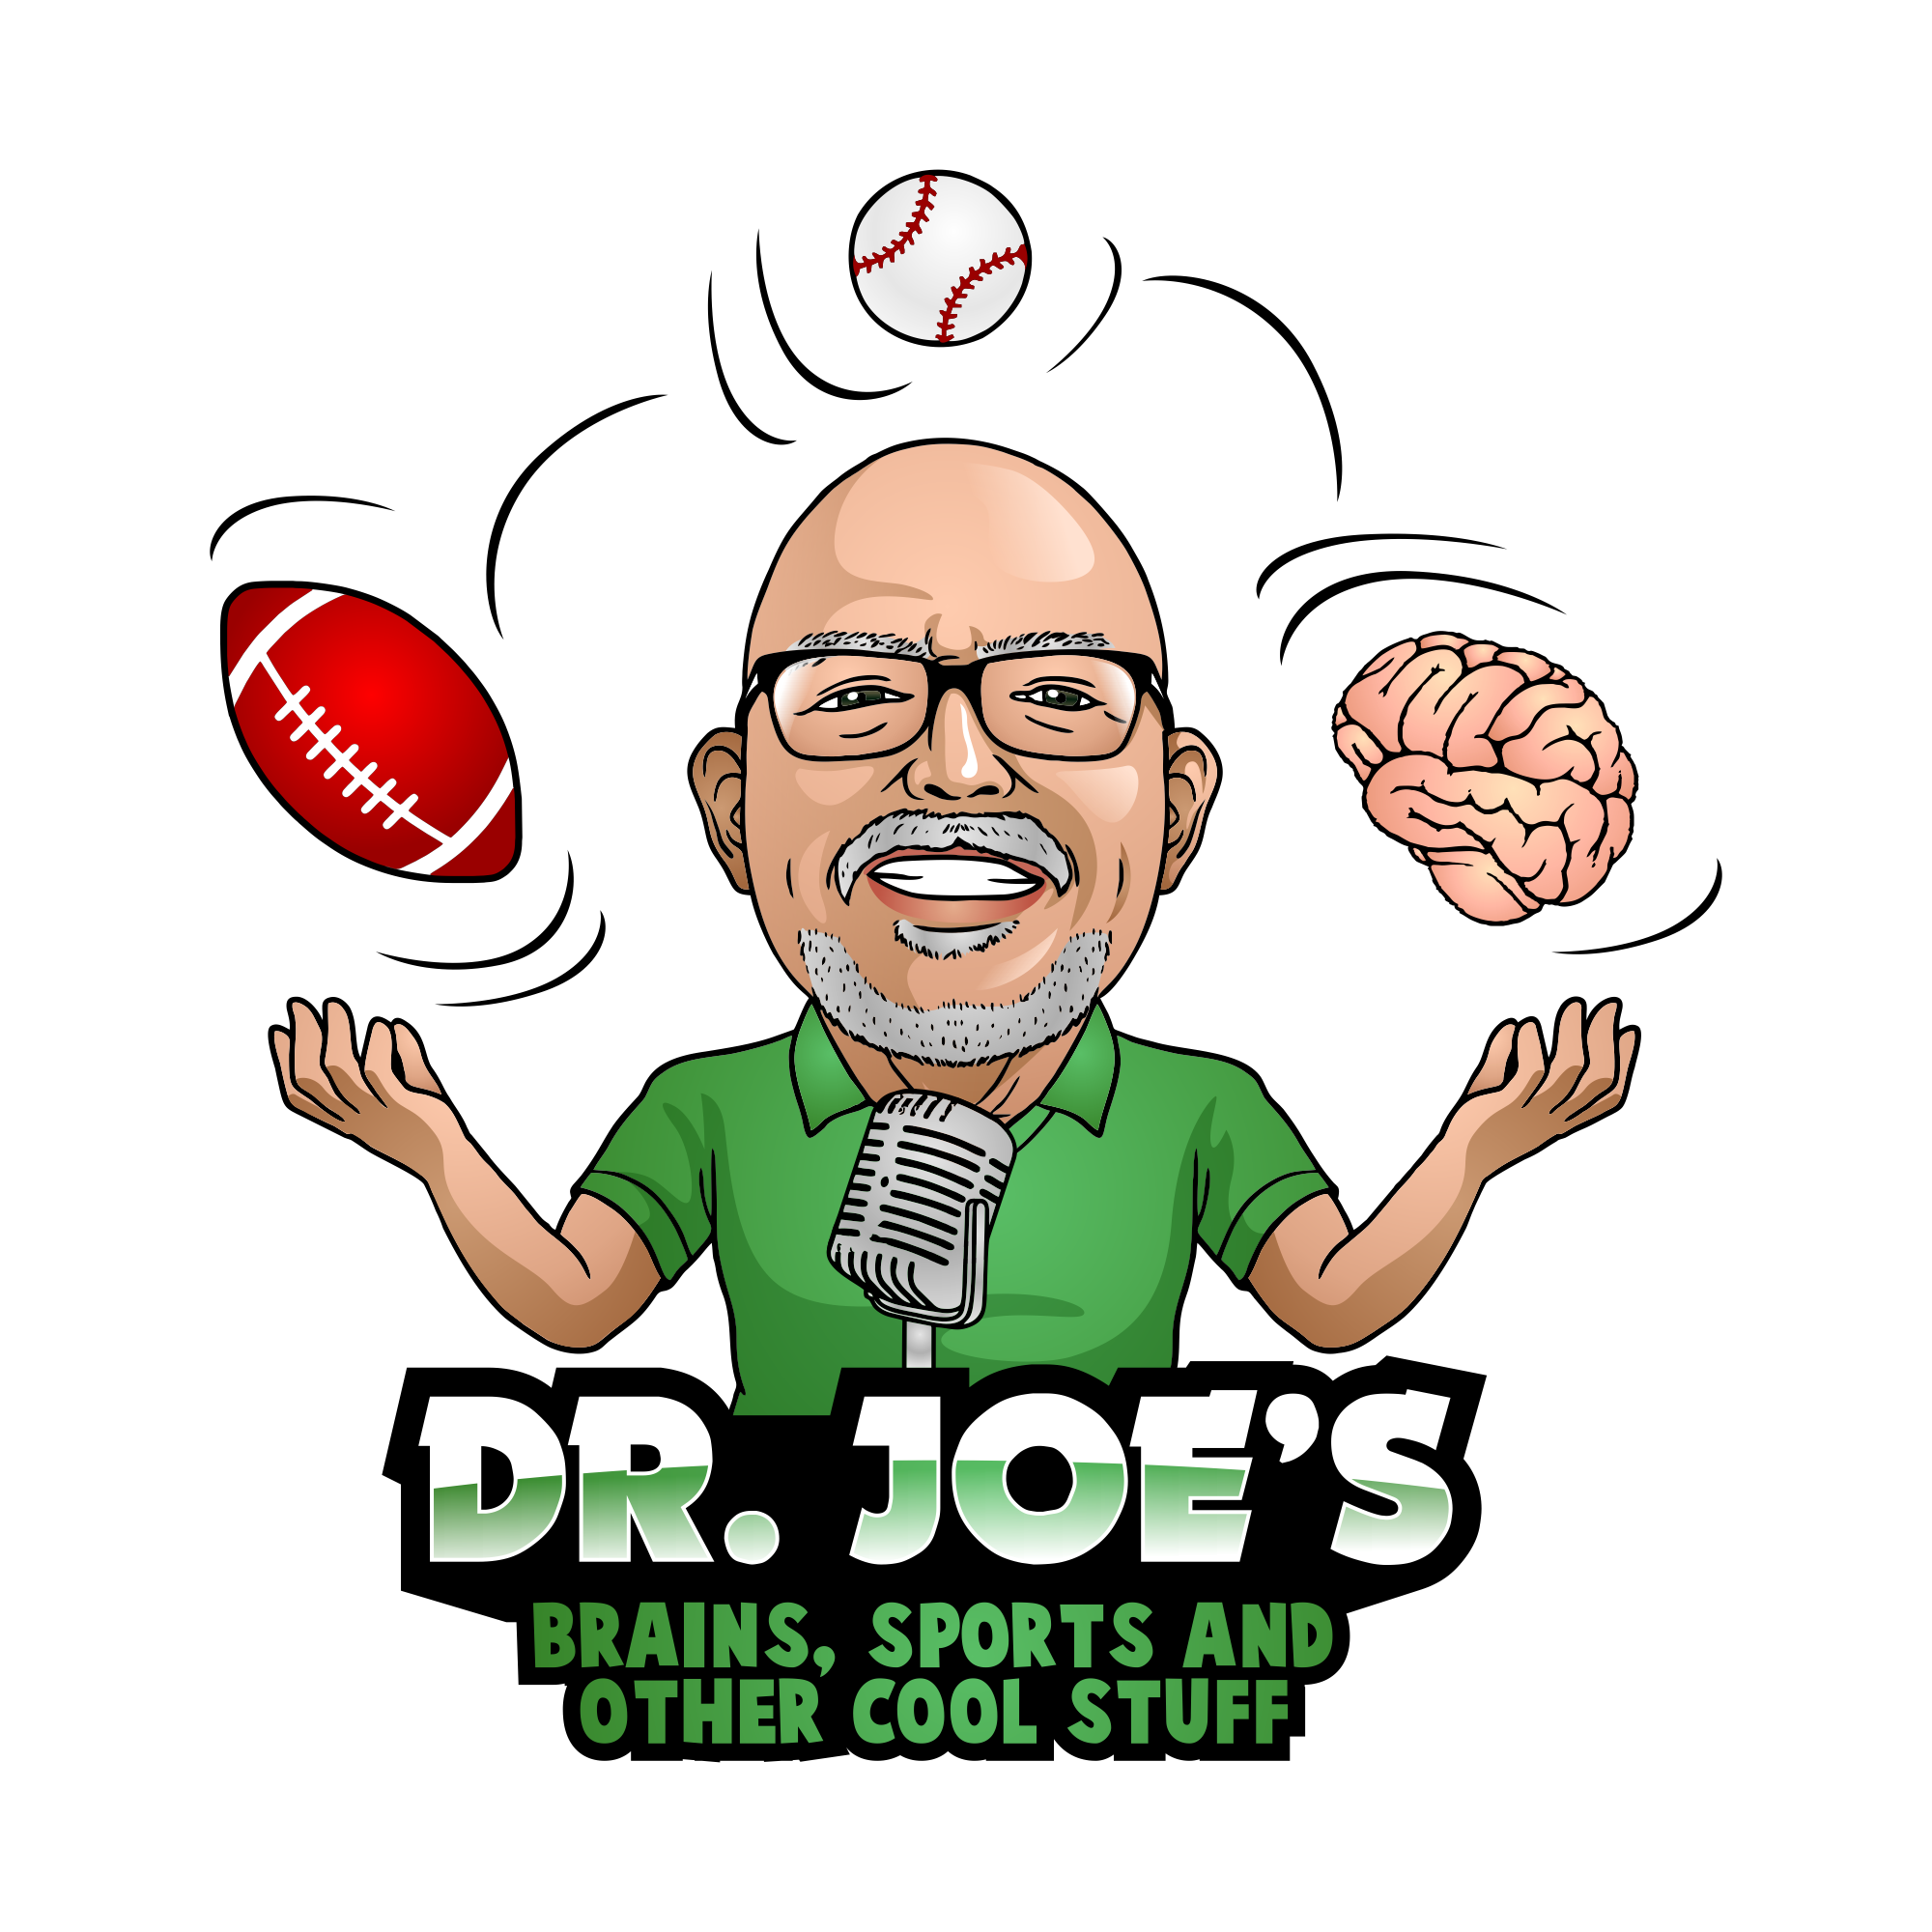 Dr Joe's Brains, Sports and other Cool Stuff